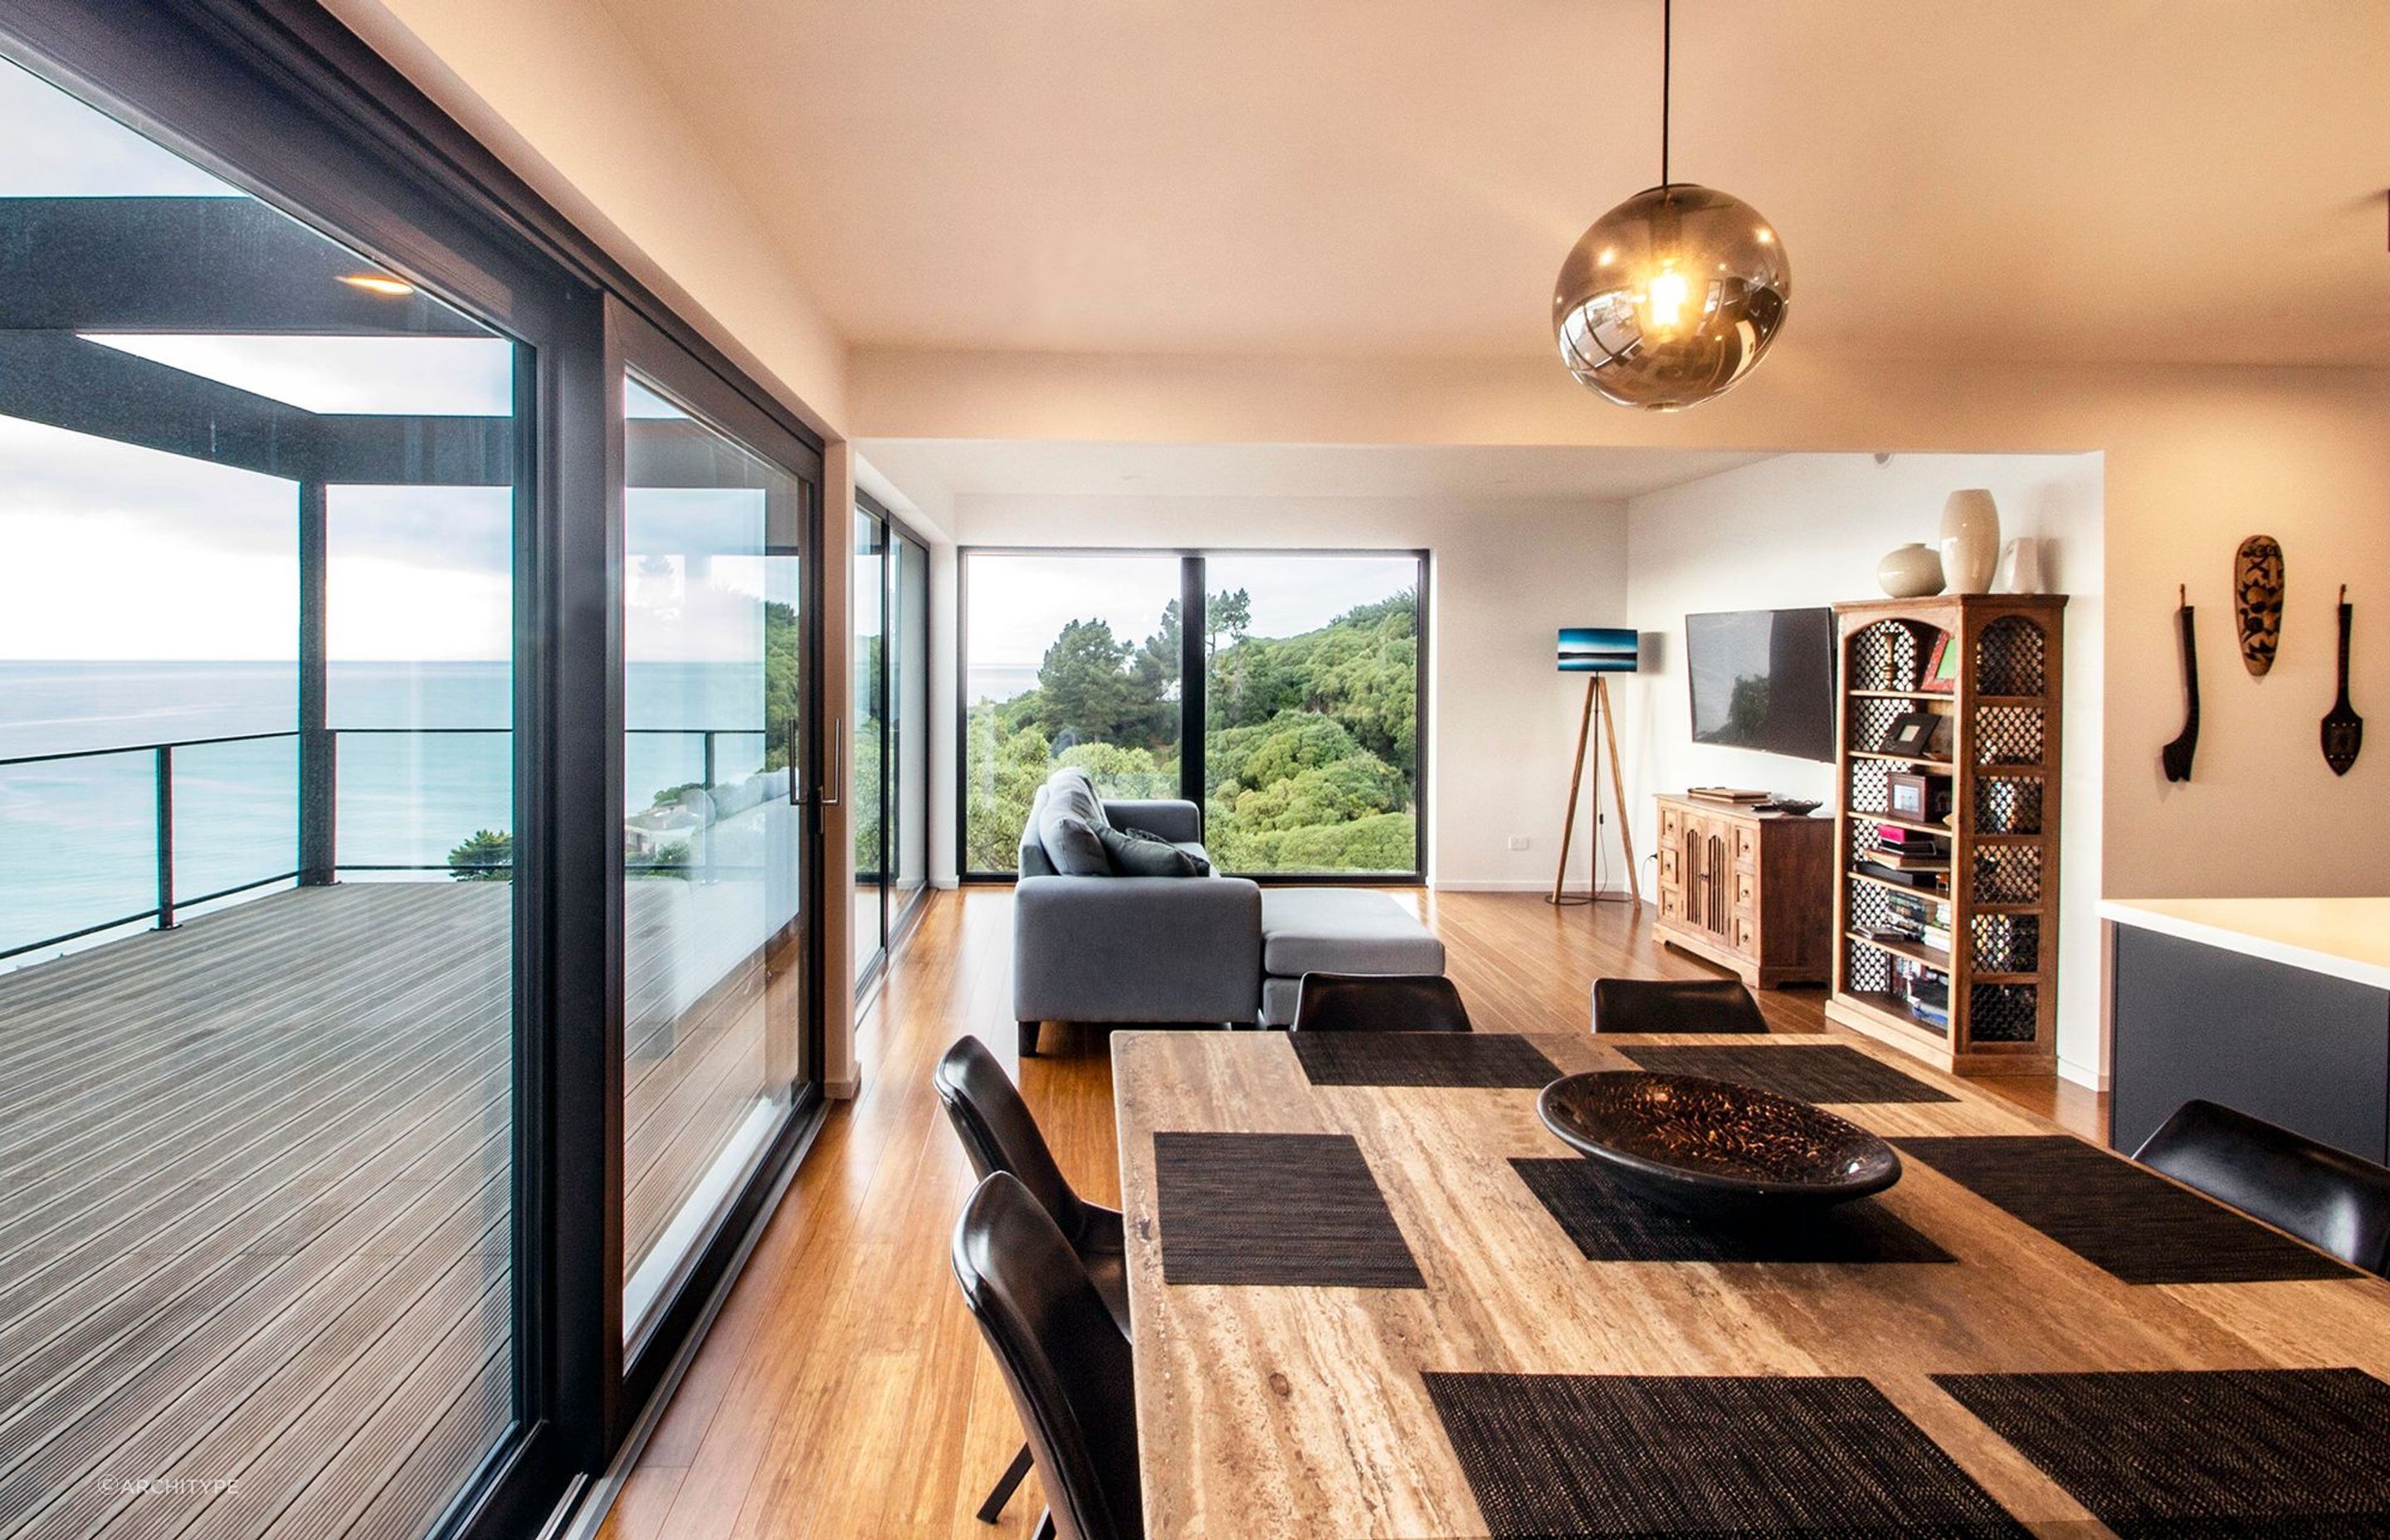 The home was designed by Architype, and is one of relatively few certified Passive houses in the country. Photo: Tim Ross